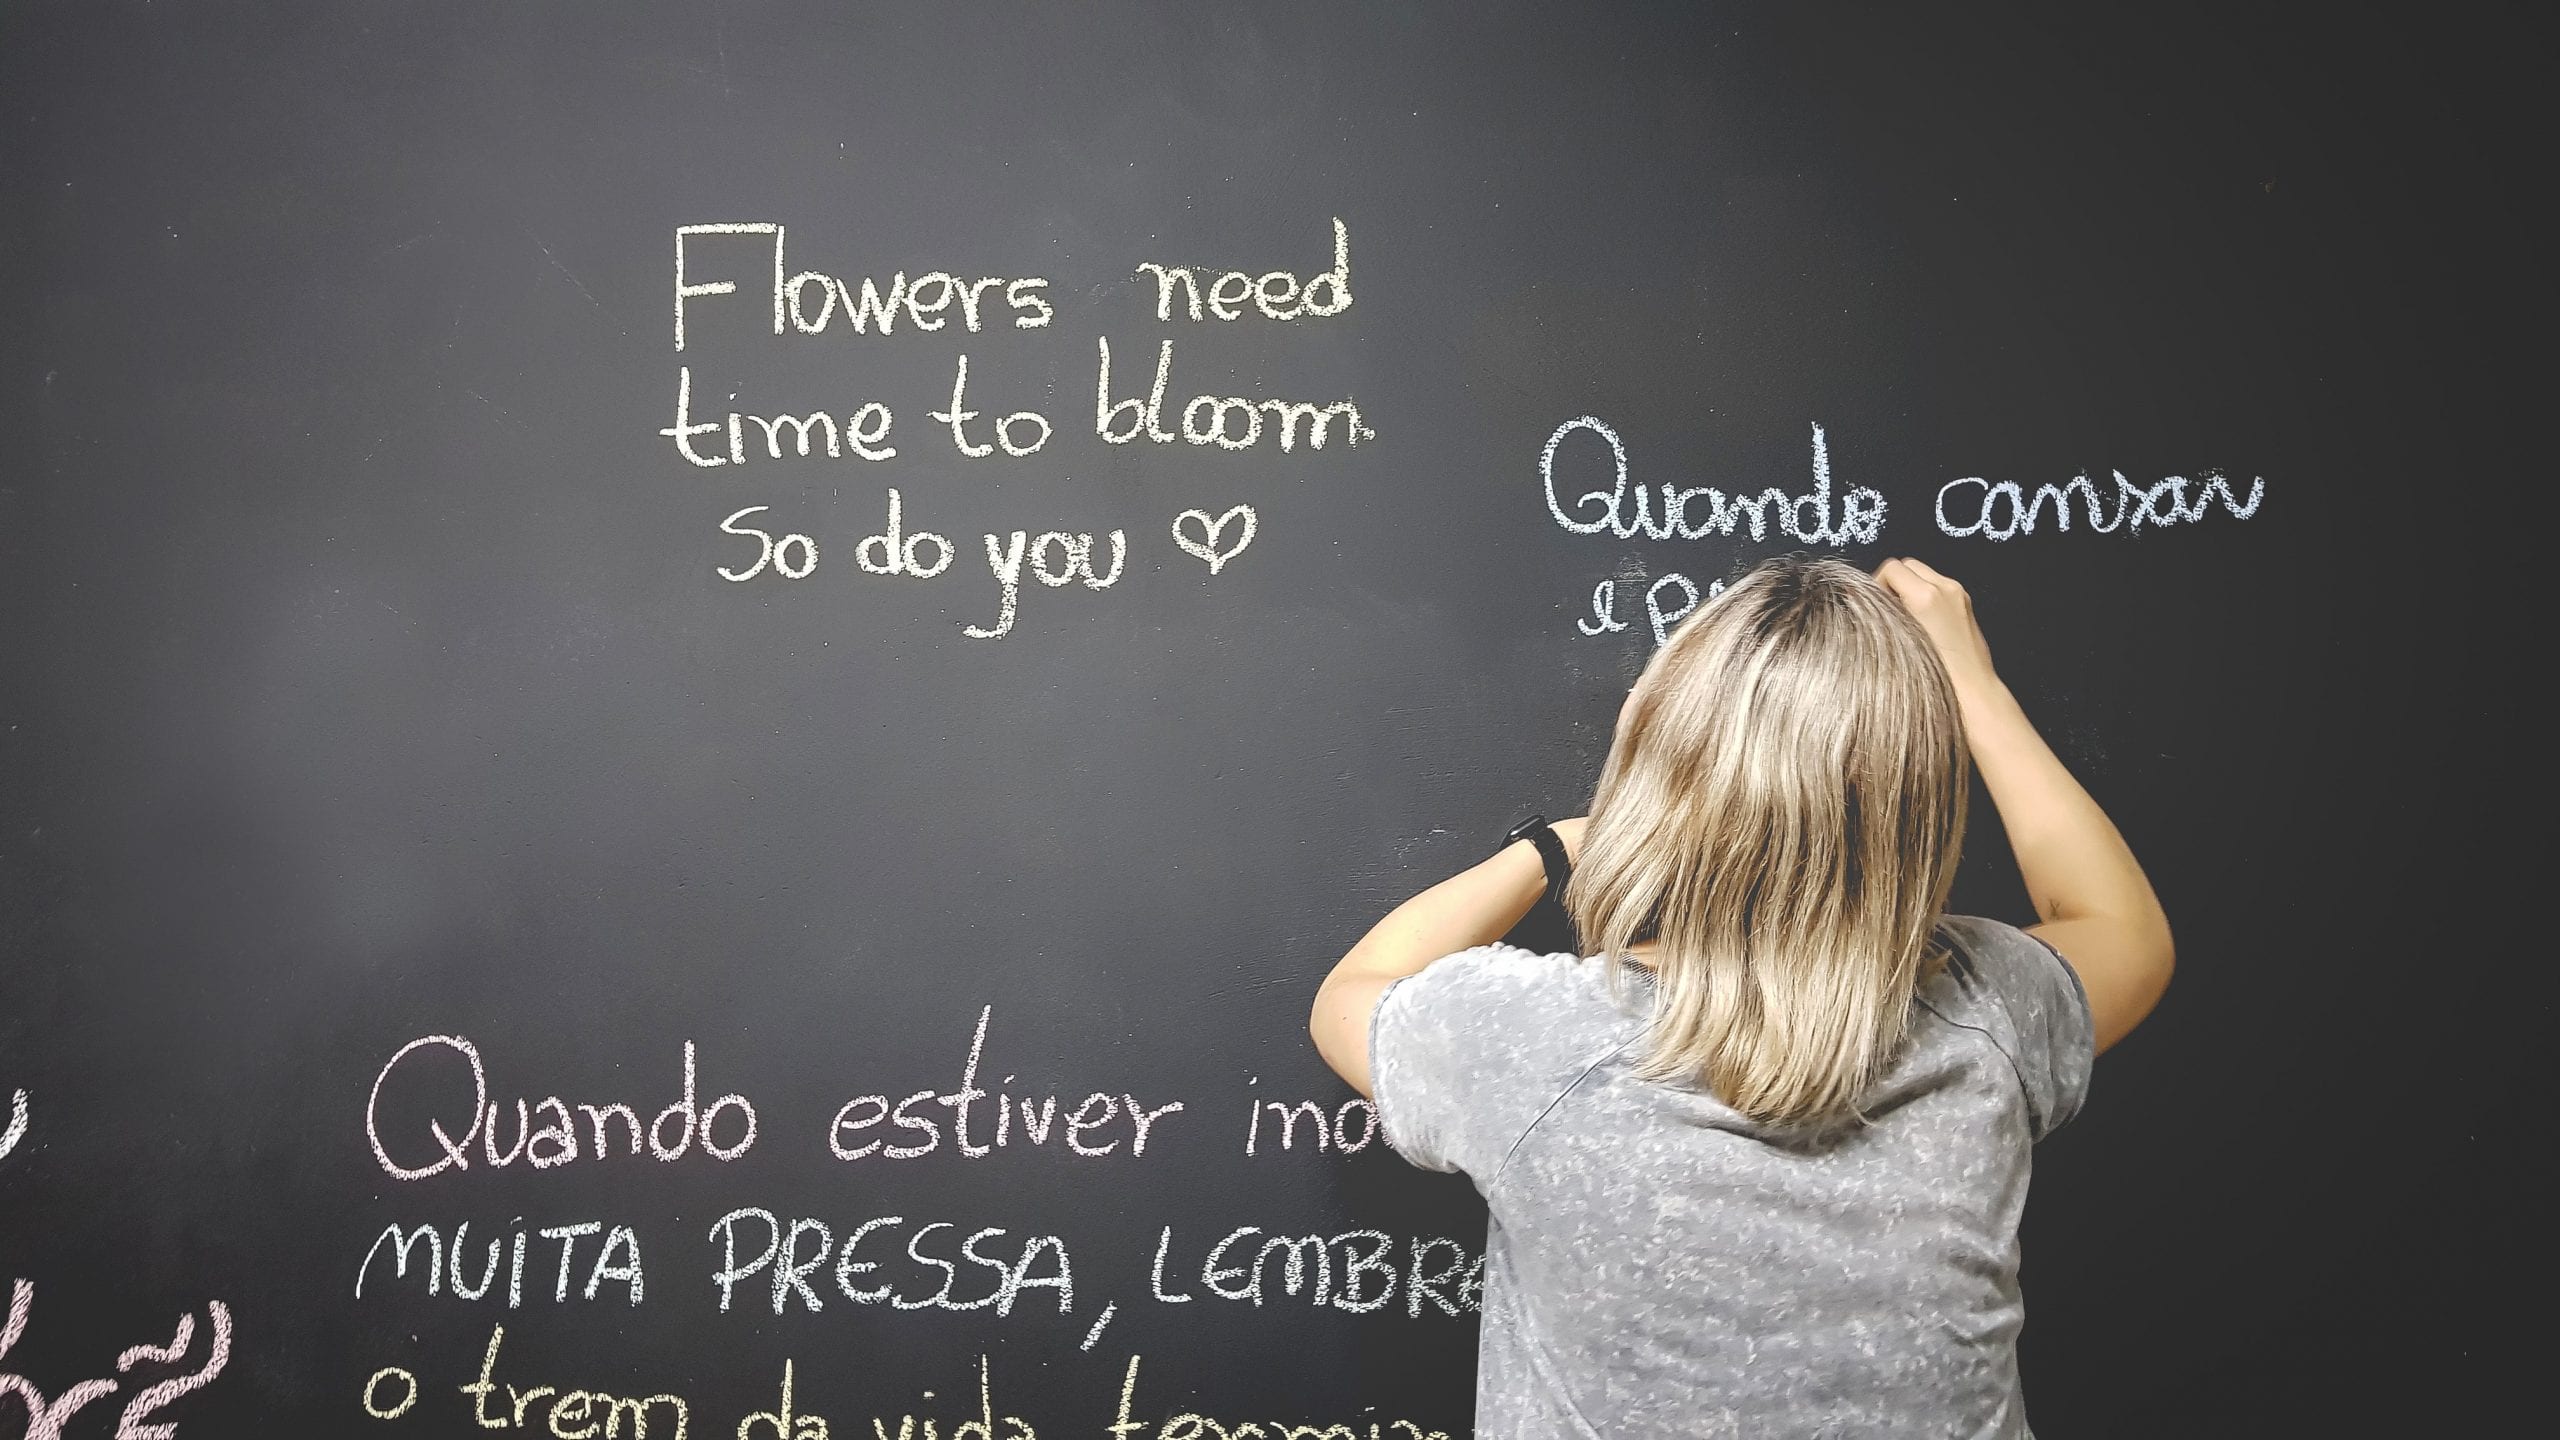 Woman writes on chalkboard: Flowers need time to bloom, so do you.